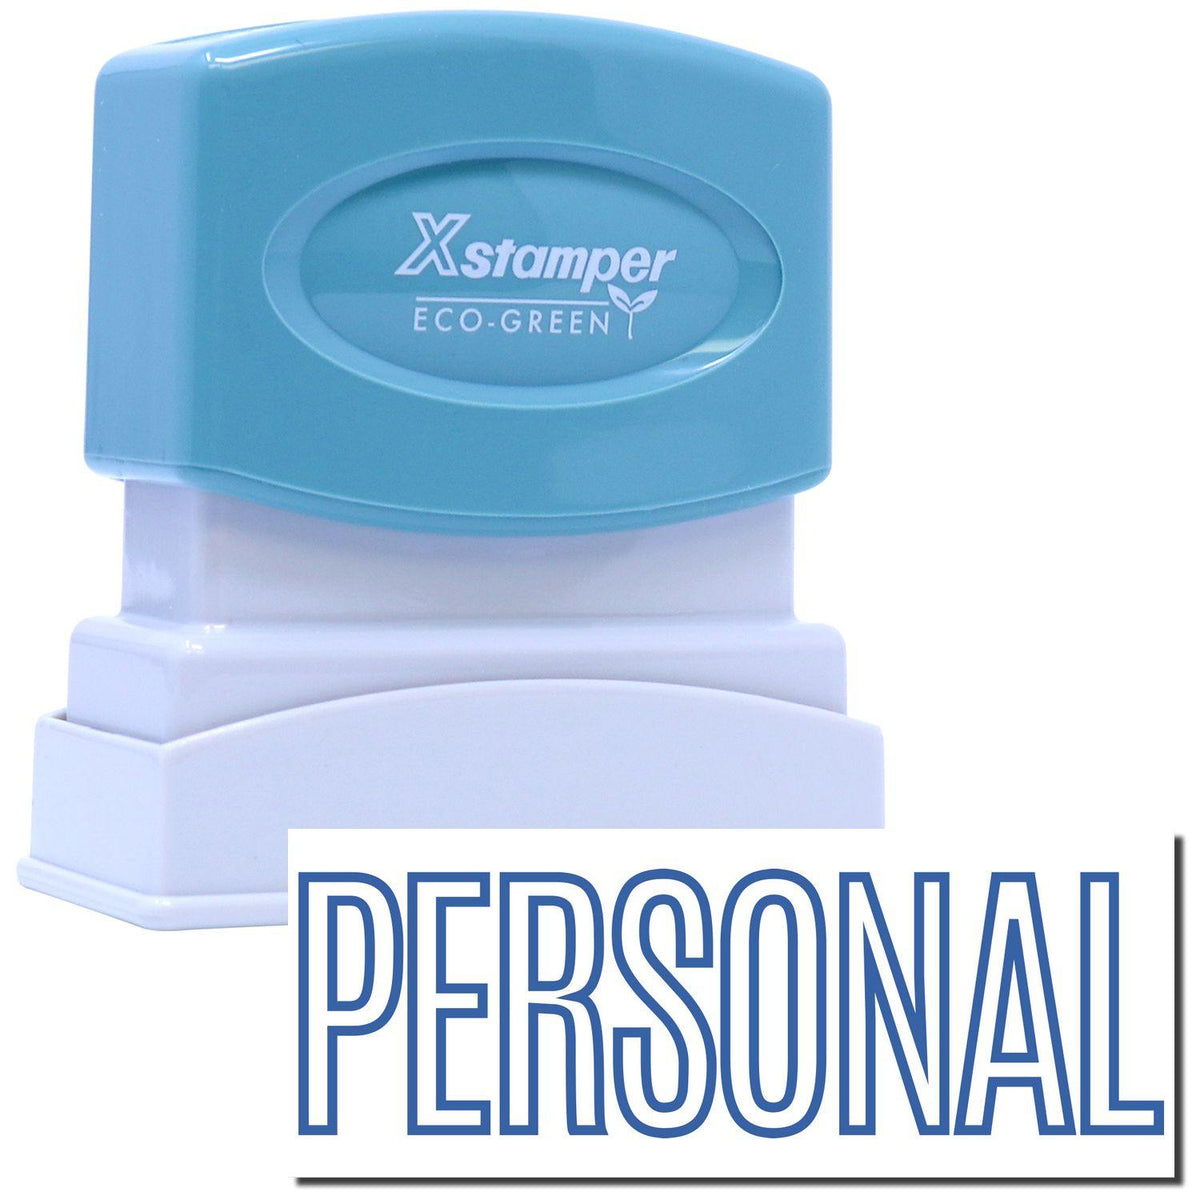 An xstamper stamp with a stamped image showing how the text &quot;PERSONAL&quot; in a blue outline font will display after stamping.